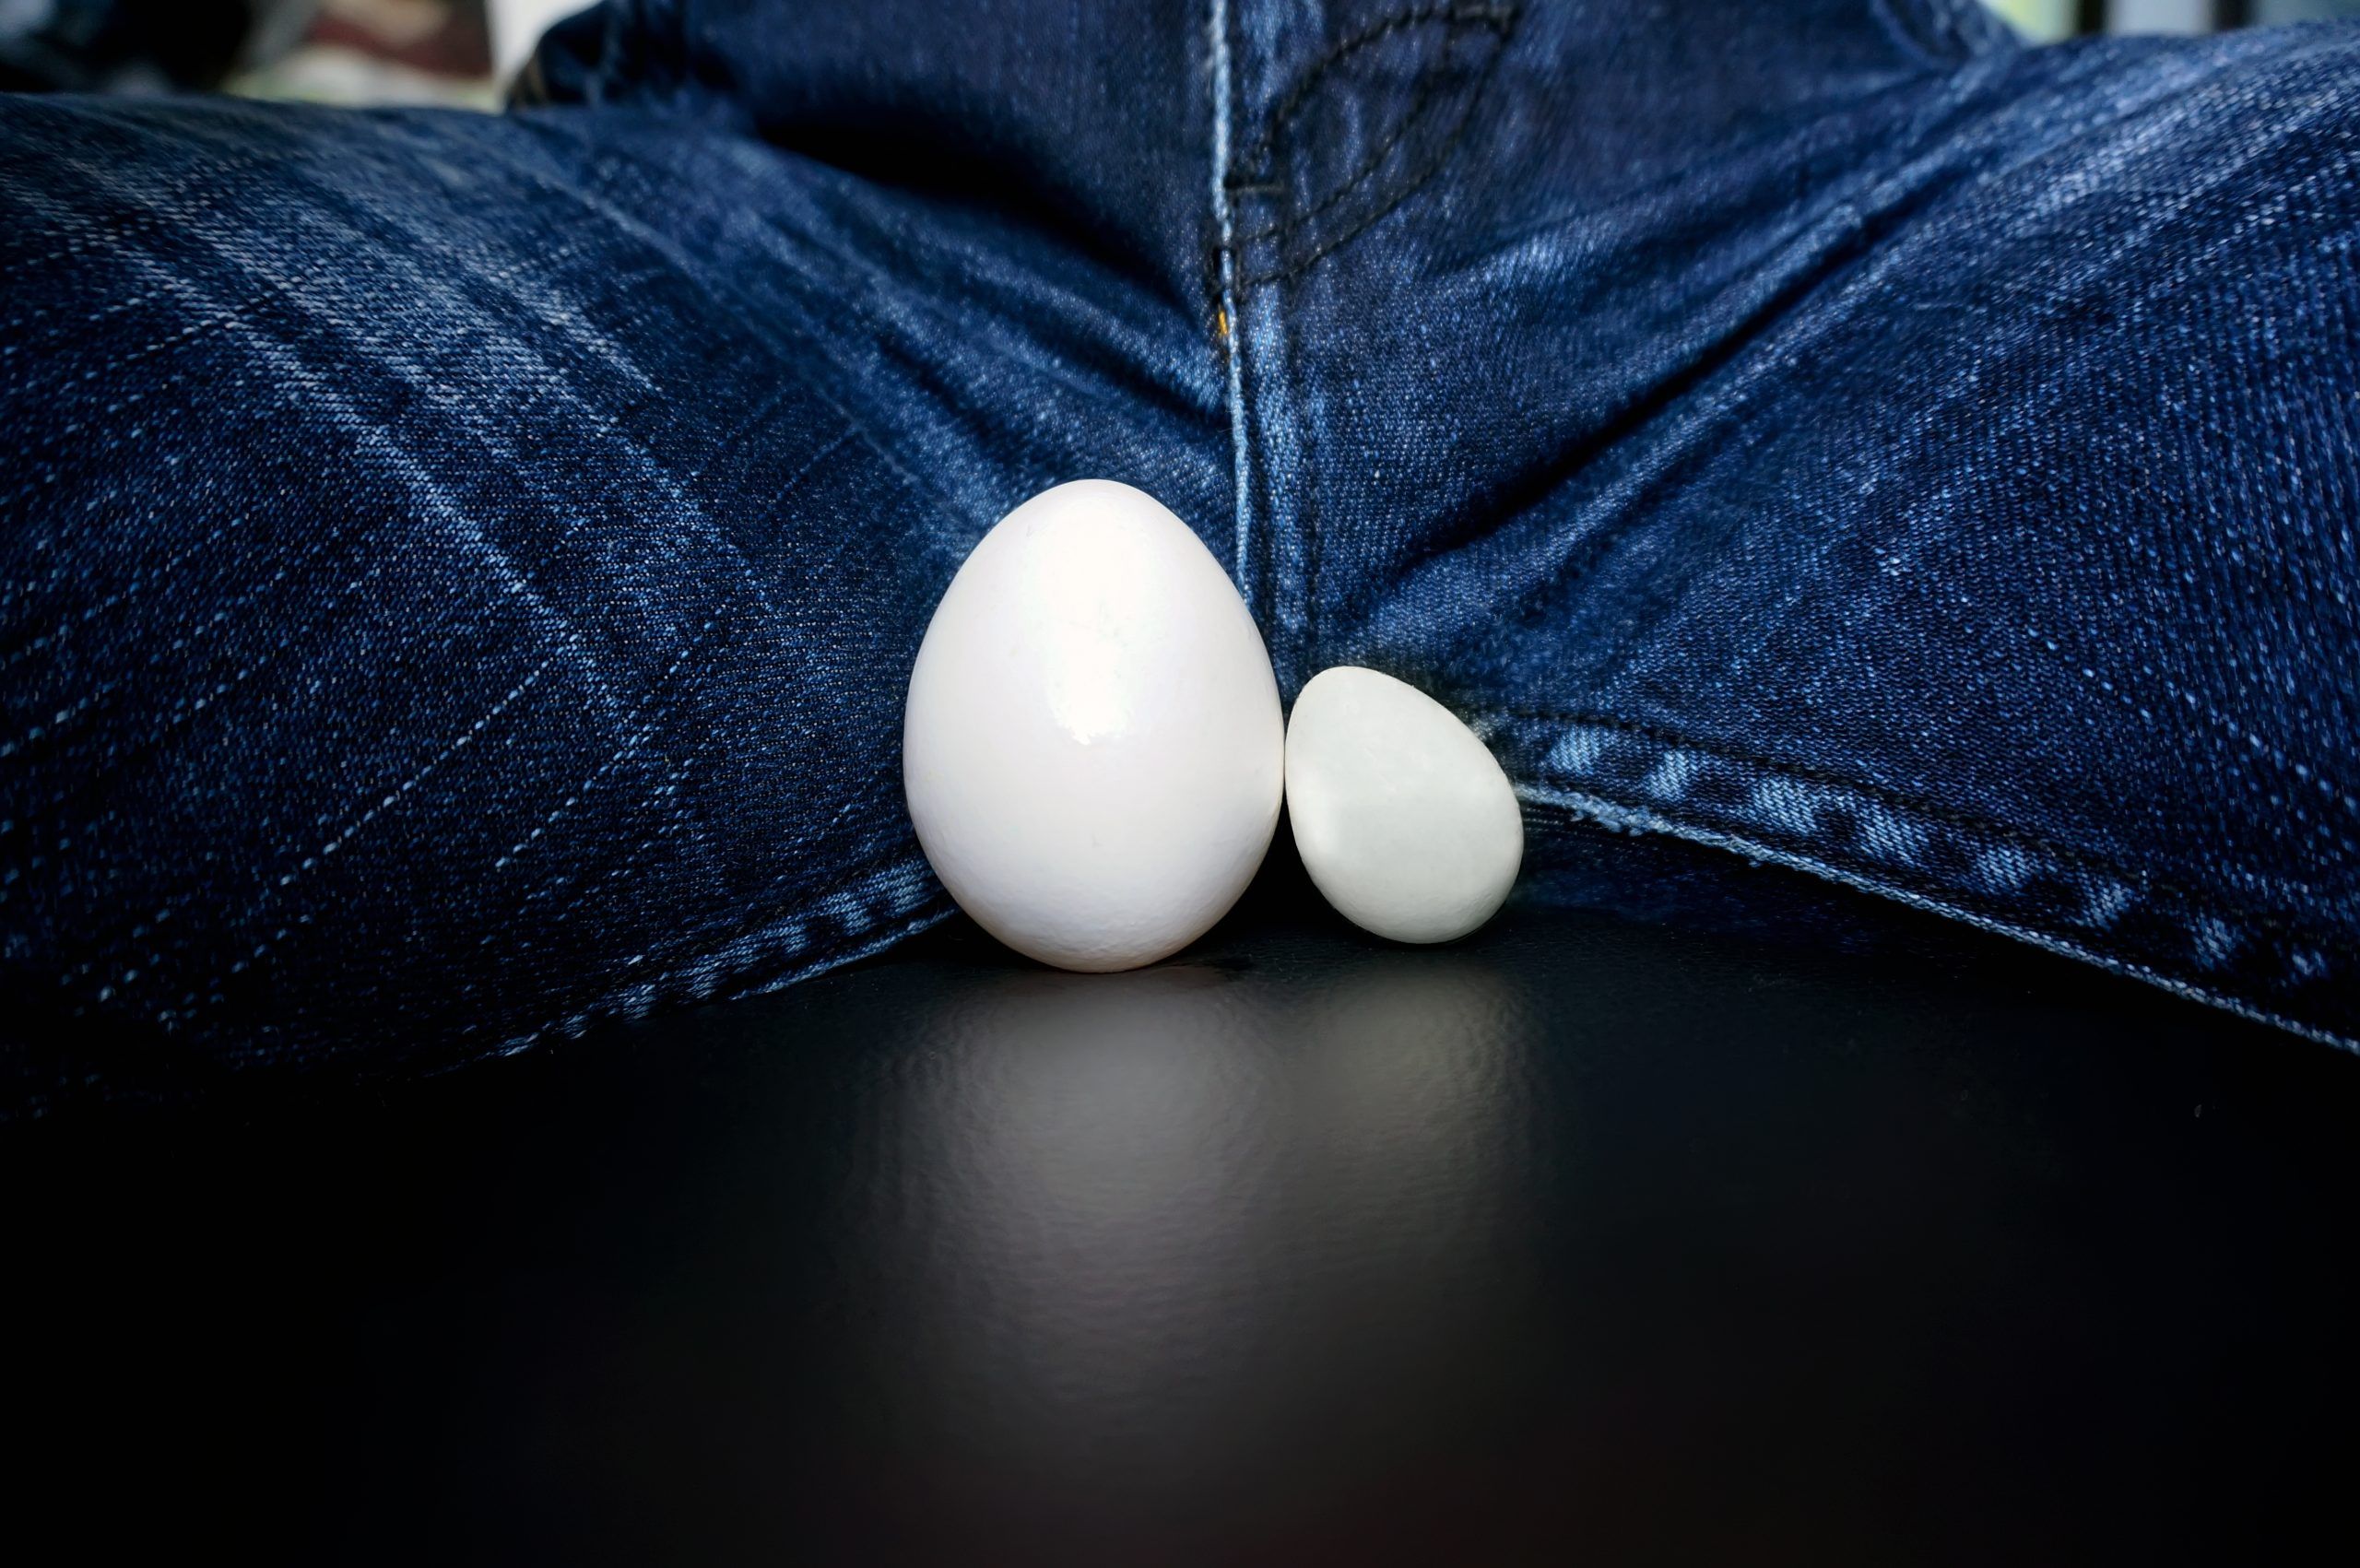 It's normal to have testicles that aren't the same size. Stock/Getty